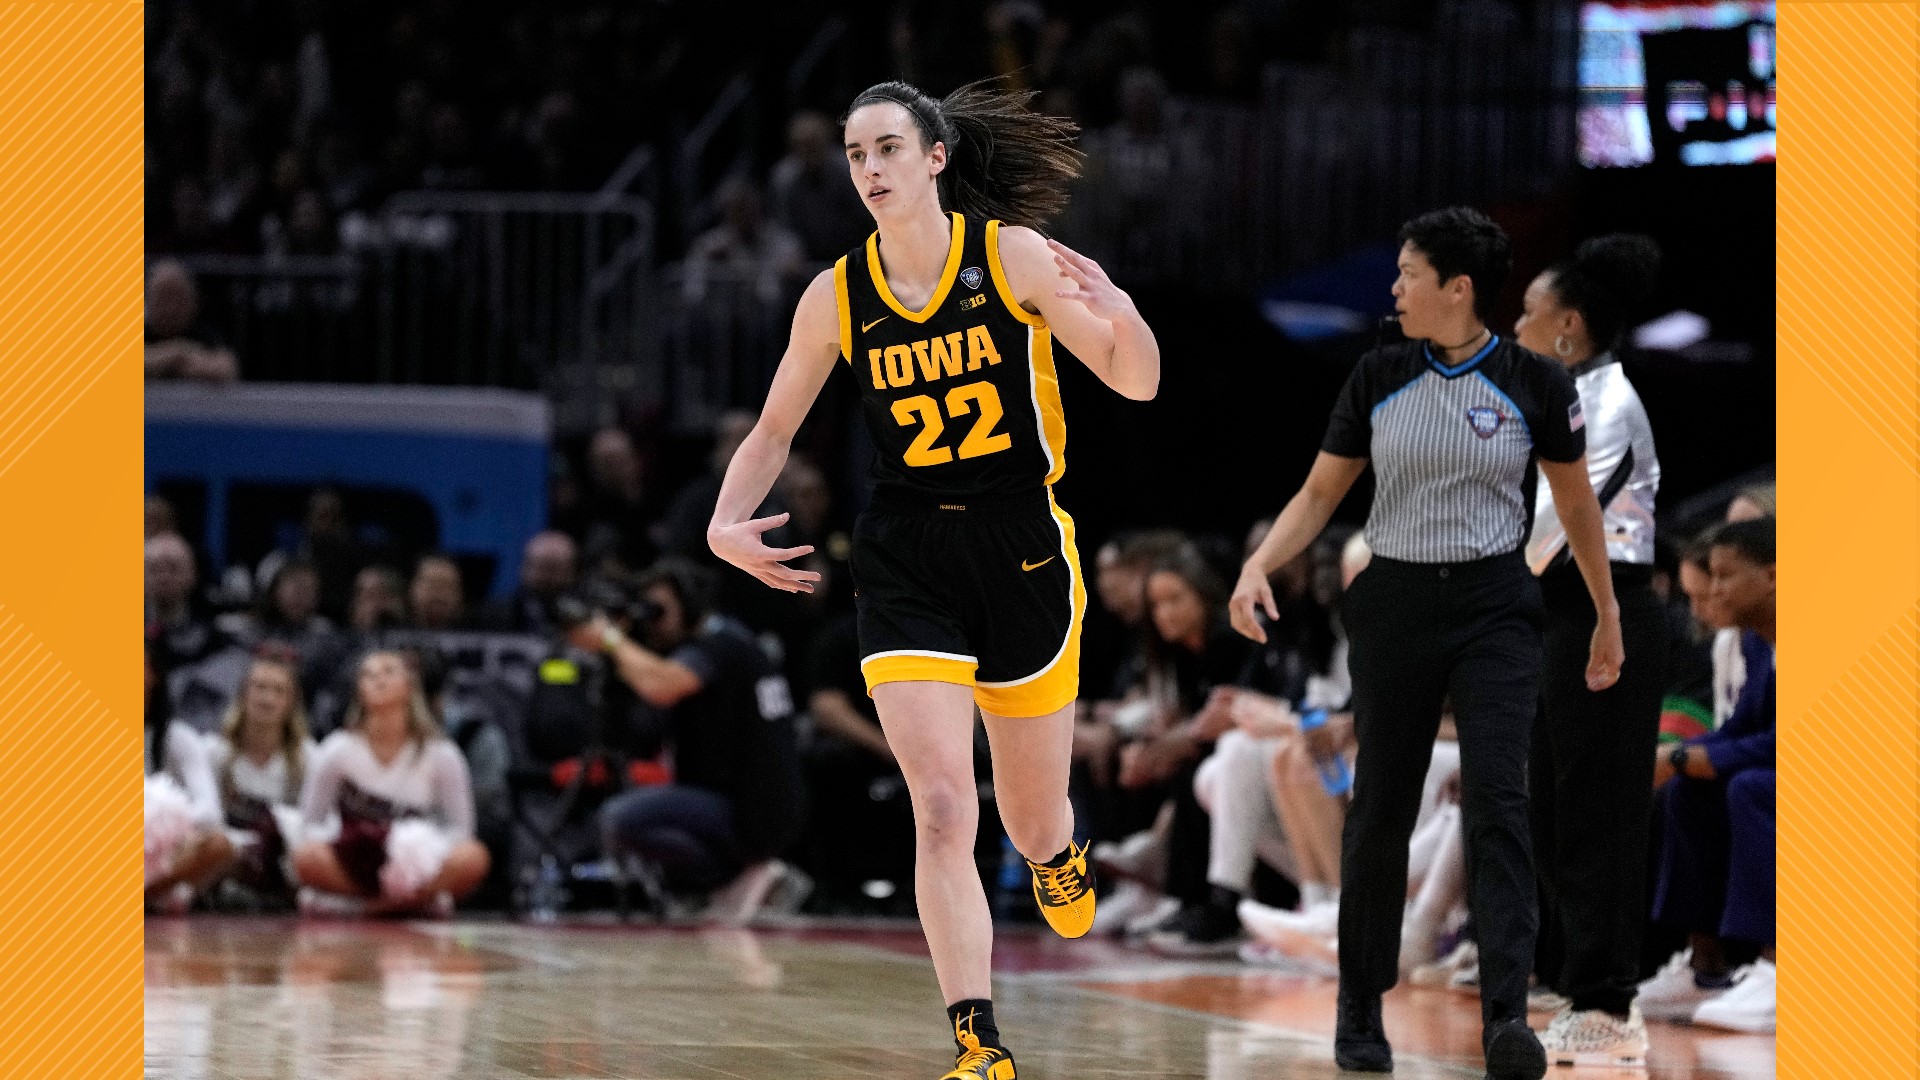 "I’m sad we lost this game, but I’m also so proud of myself, I’m so proud of my teammates, I’m so proud of this program," Clark said of Iowa's loss Sunday.